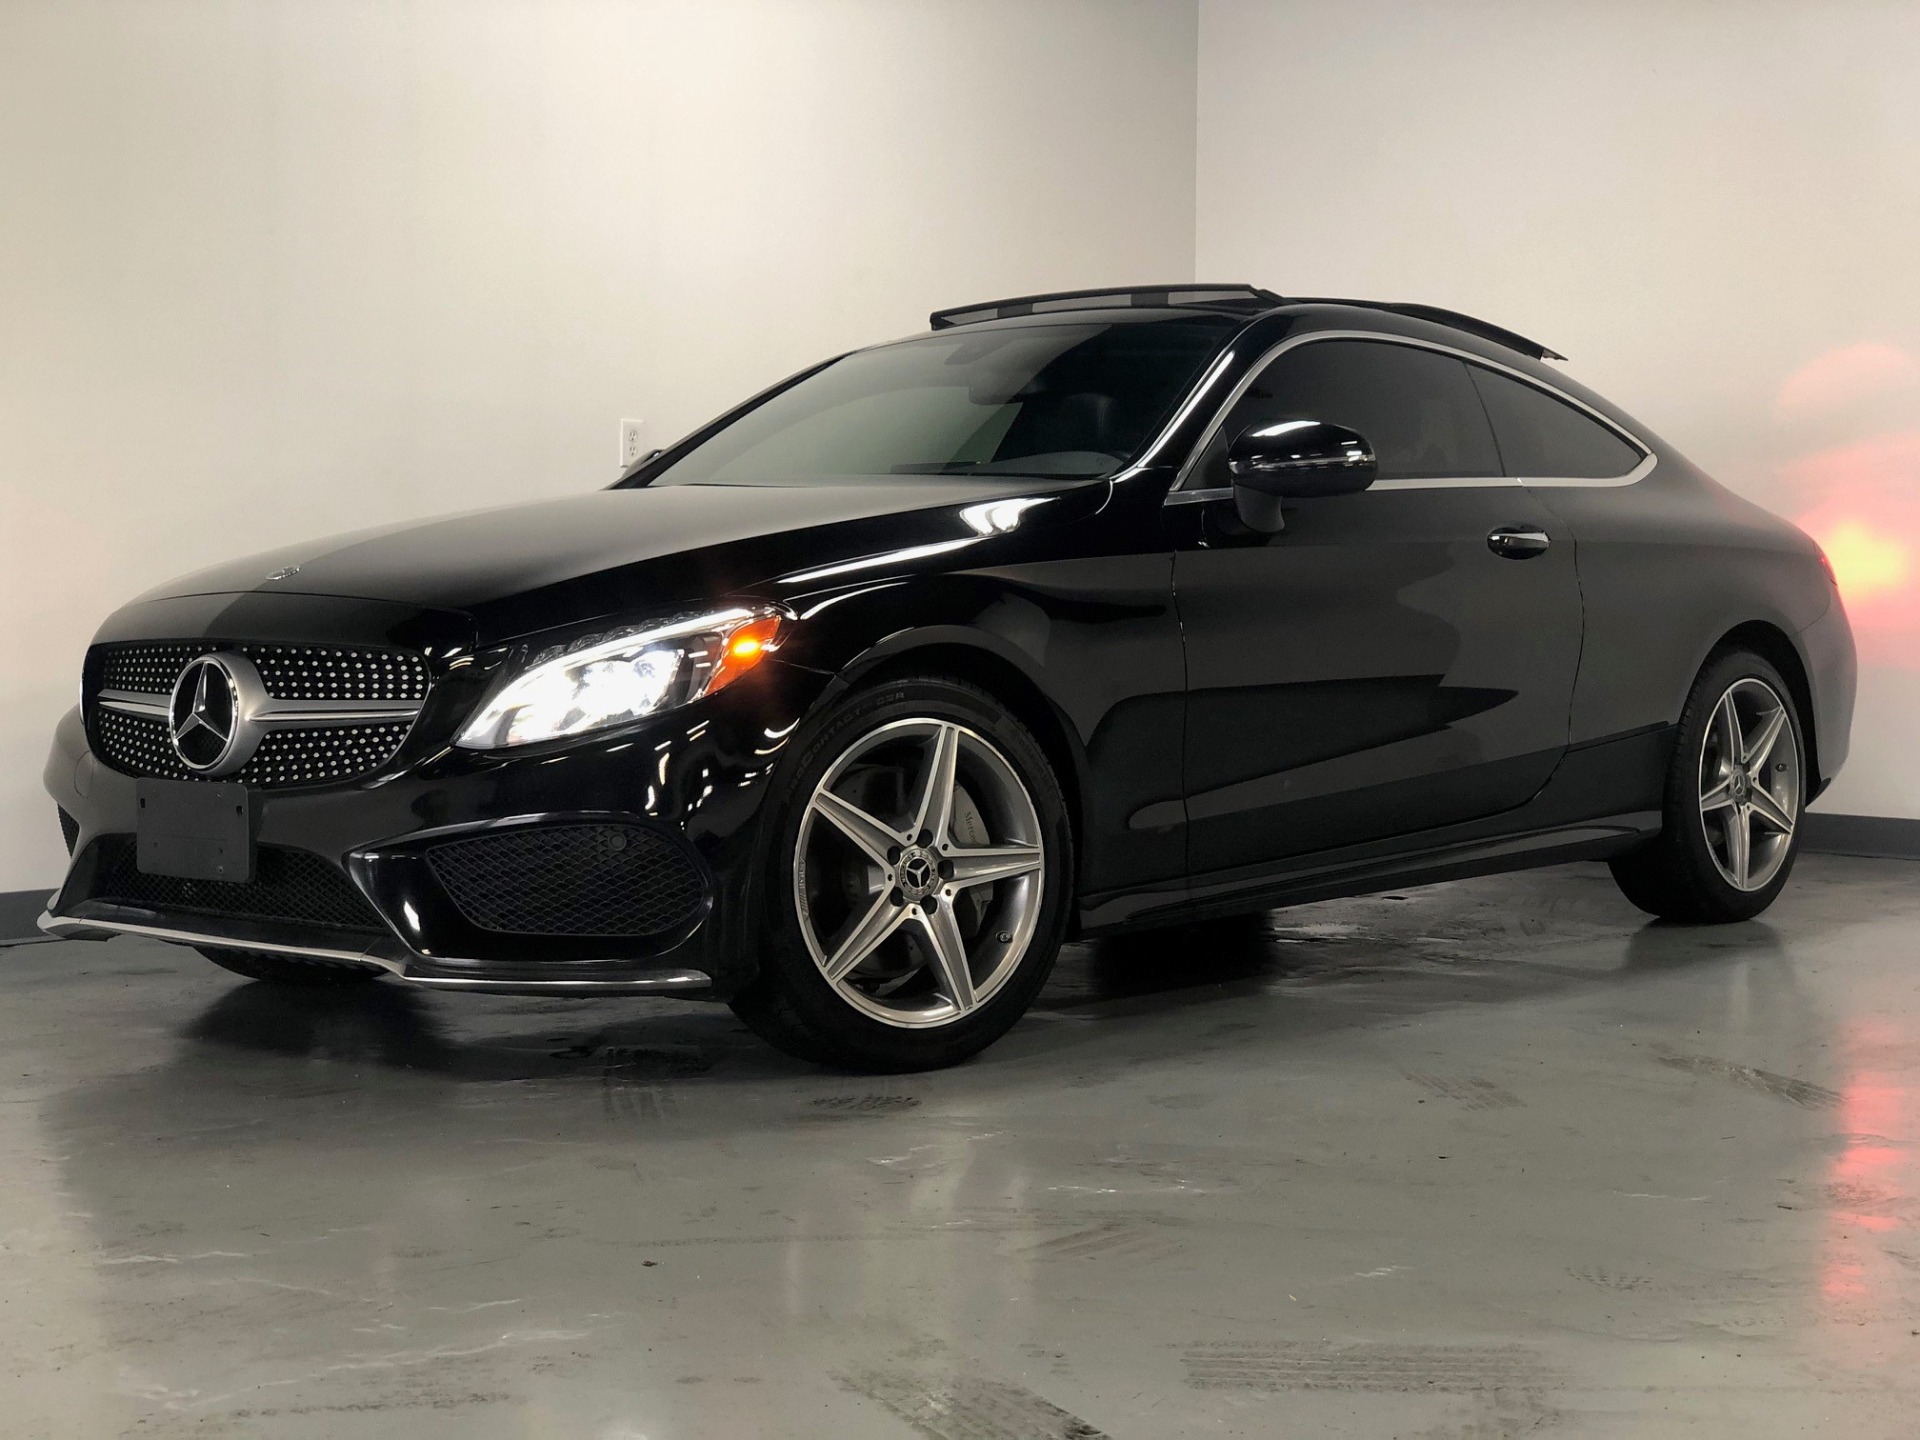 Used 17 Black Mercedes Benz C Class C300 Awd C 300 4matic For Sale Sold Prime Motorz Stock 2778